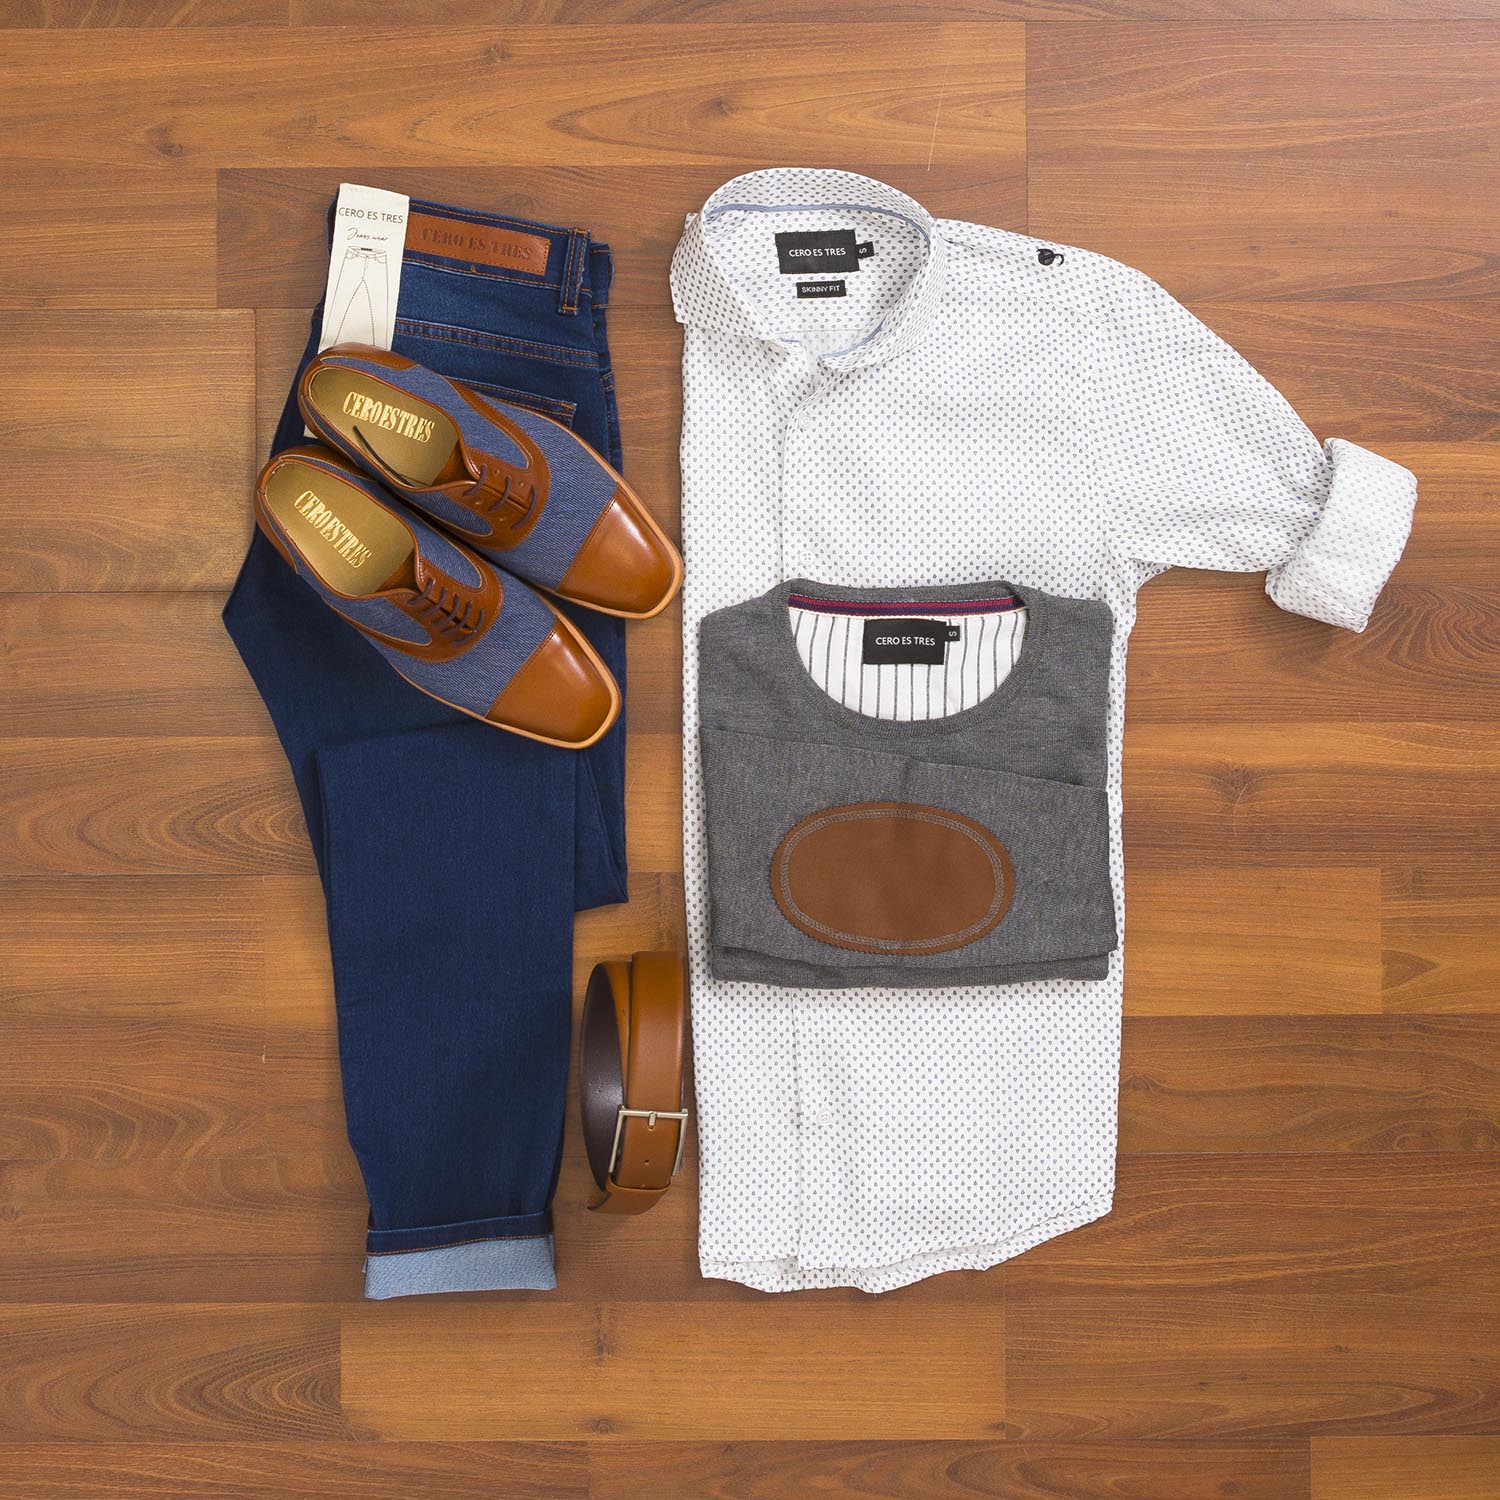 OUTFIT CERO 306